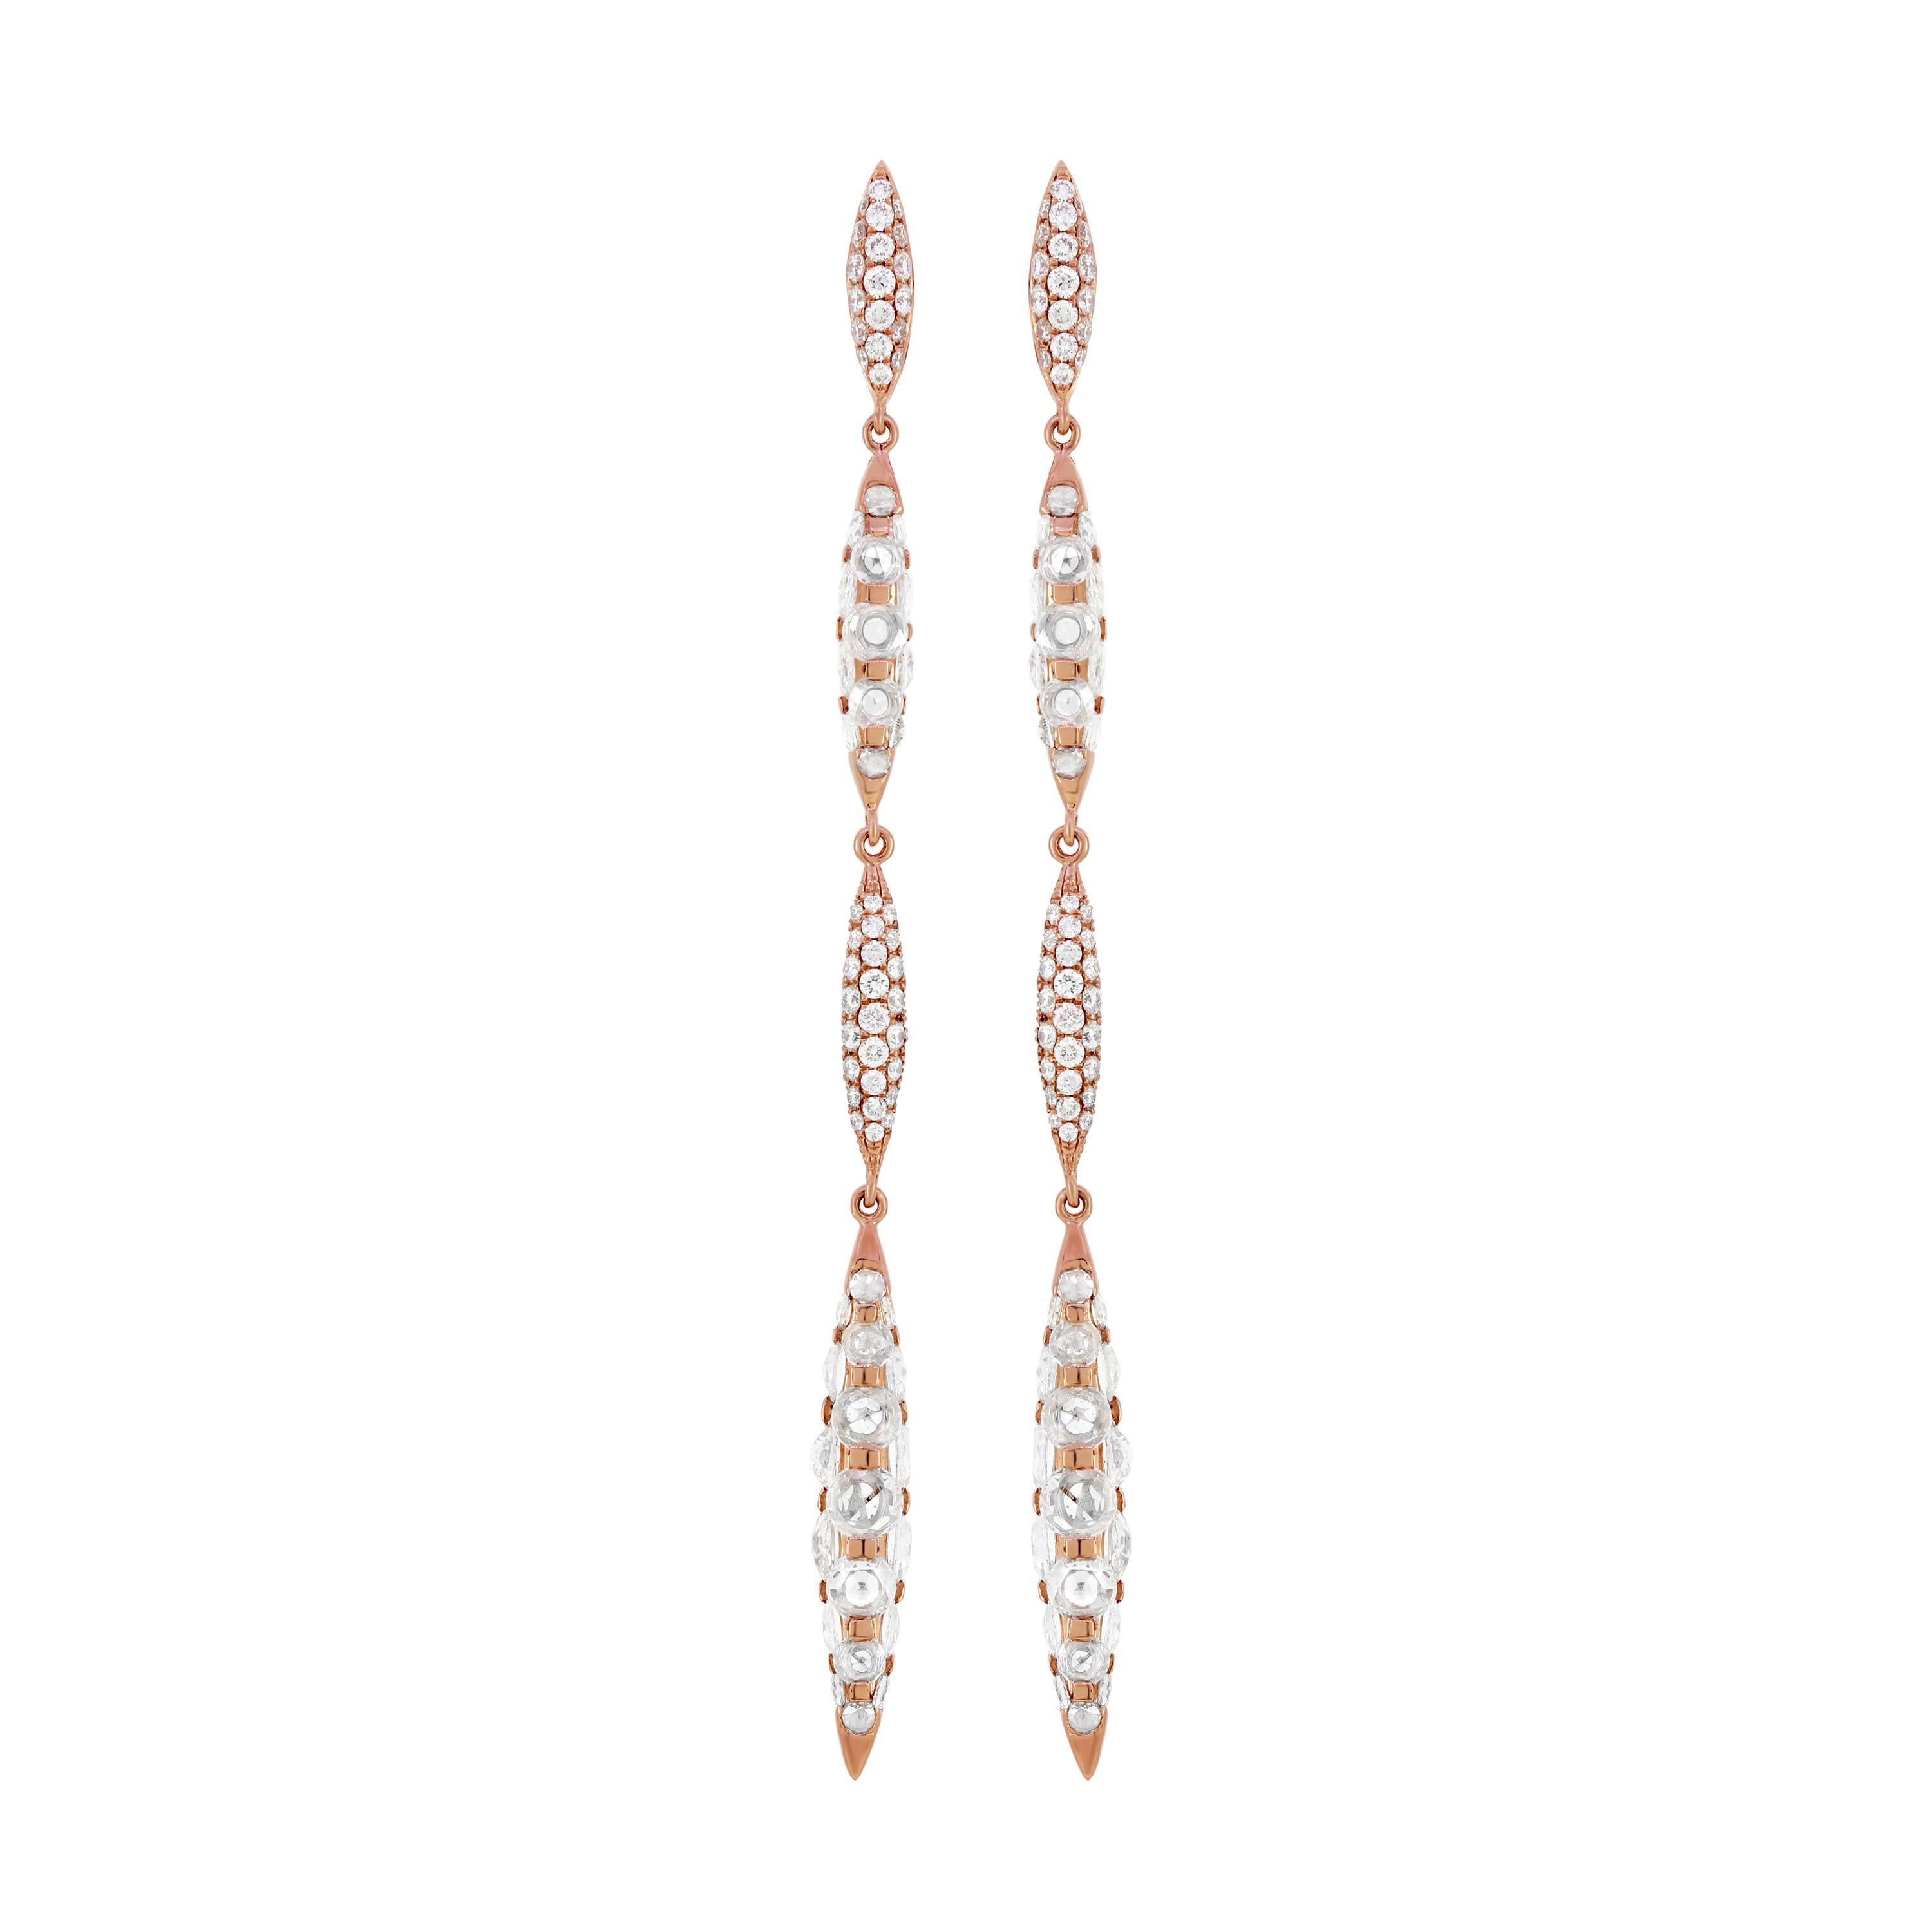 Add a touch of elegance to your jewelry collection with the Nigaam 4.51 Cttw. Round Rose-Cut Diamond Dangle Earrings in 18K Rose Gold. These earrings are a true work of art, combining classic design with modern styling to create a unique and